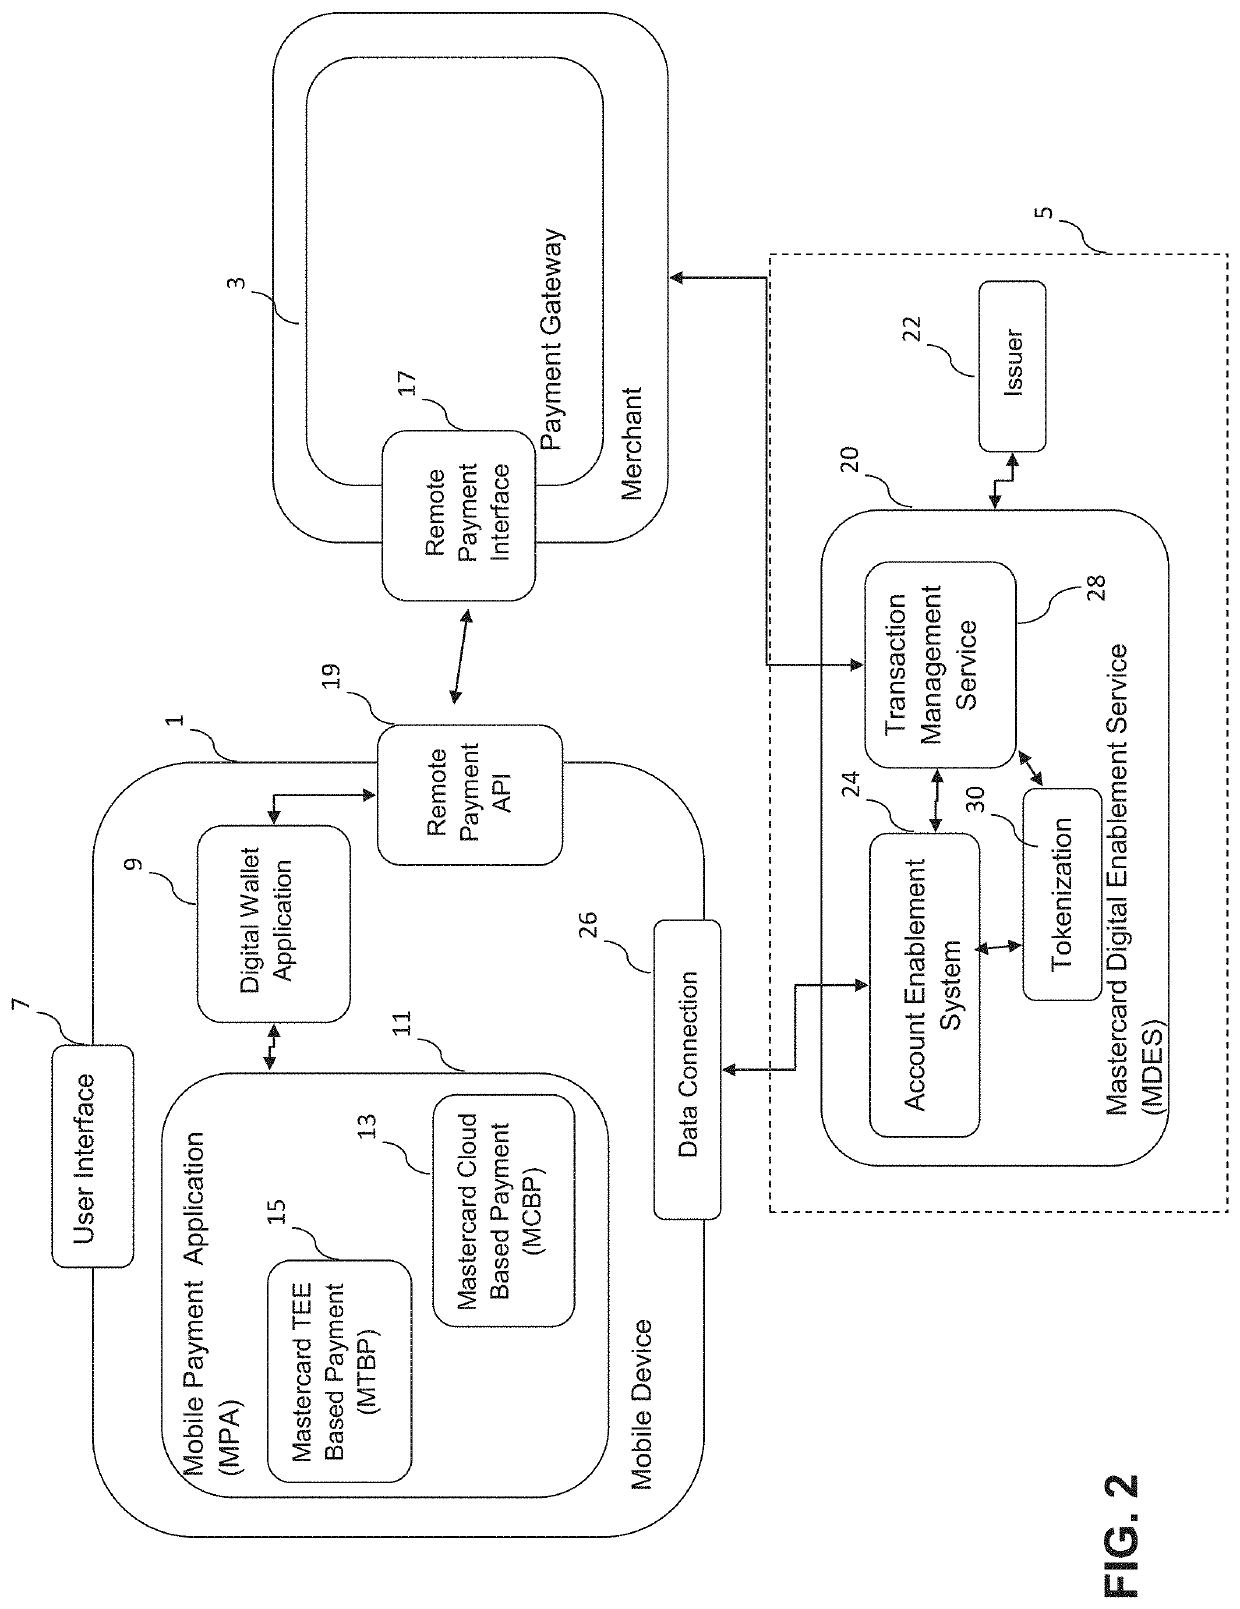 Security and authentication of interaction data